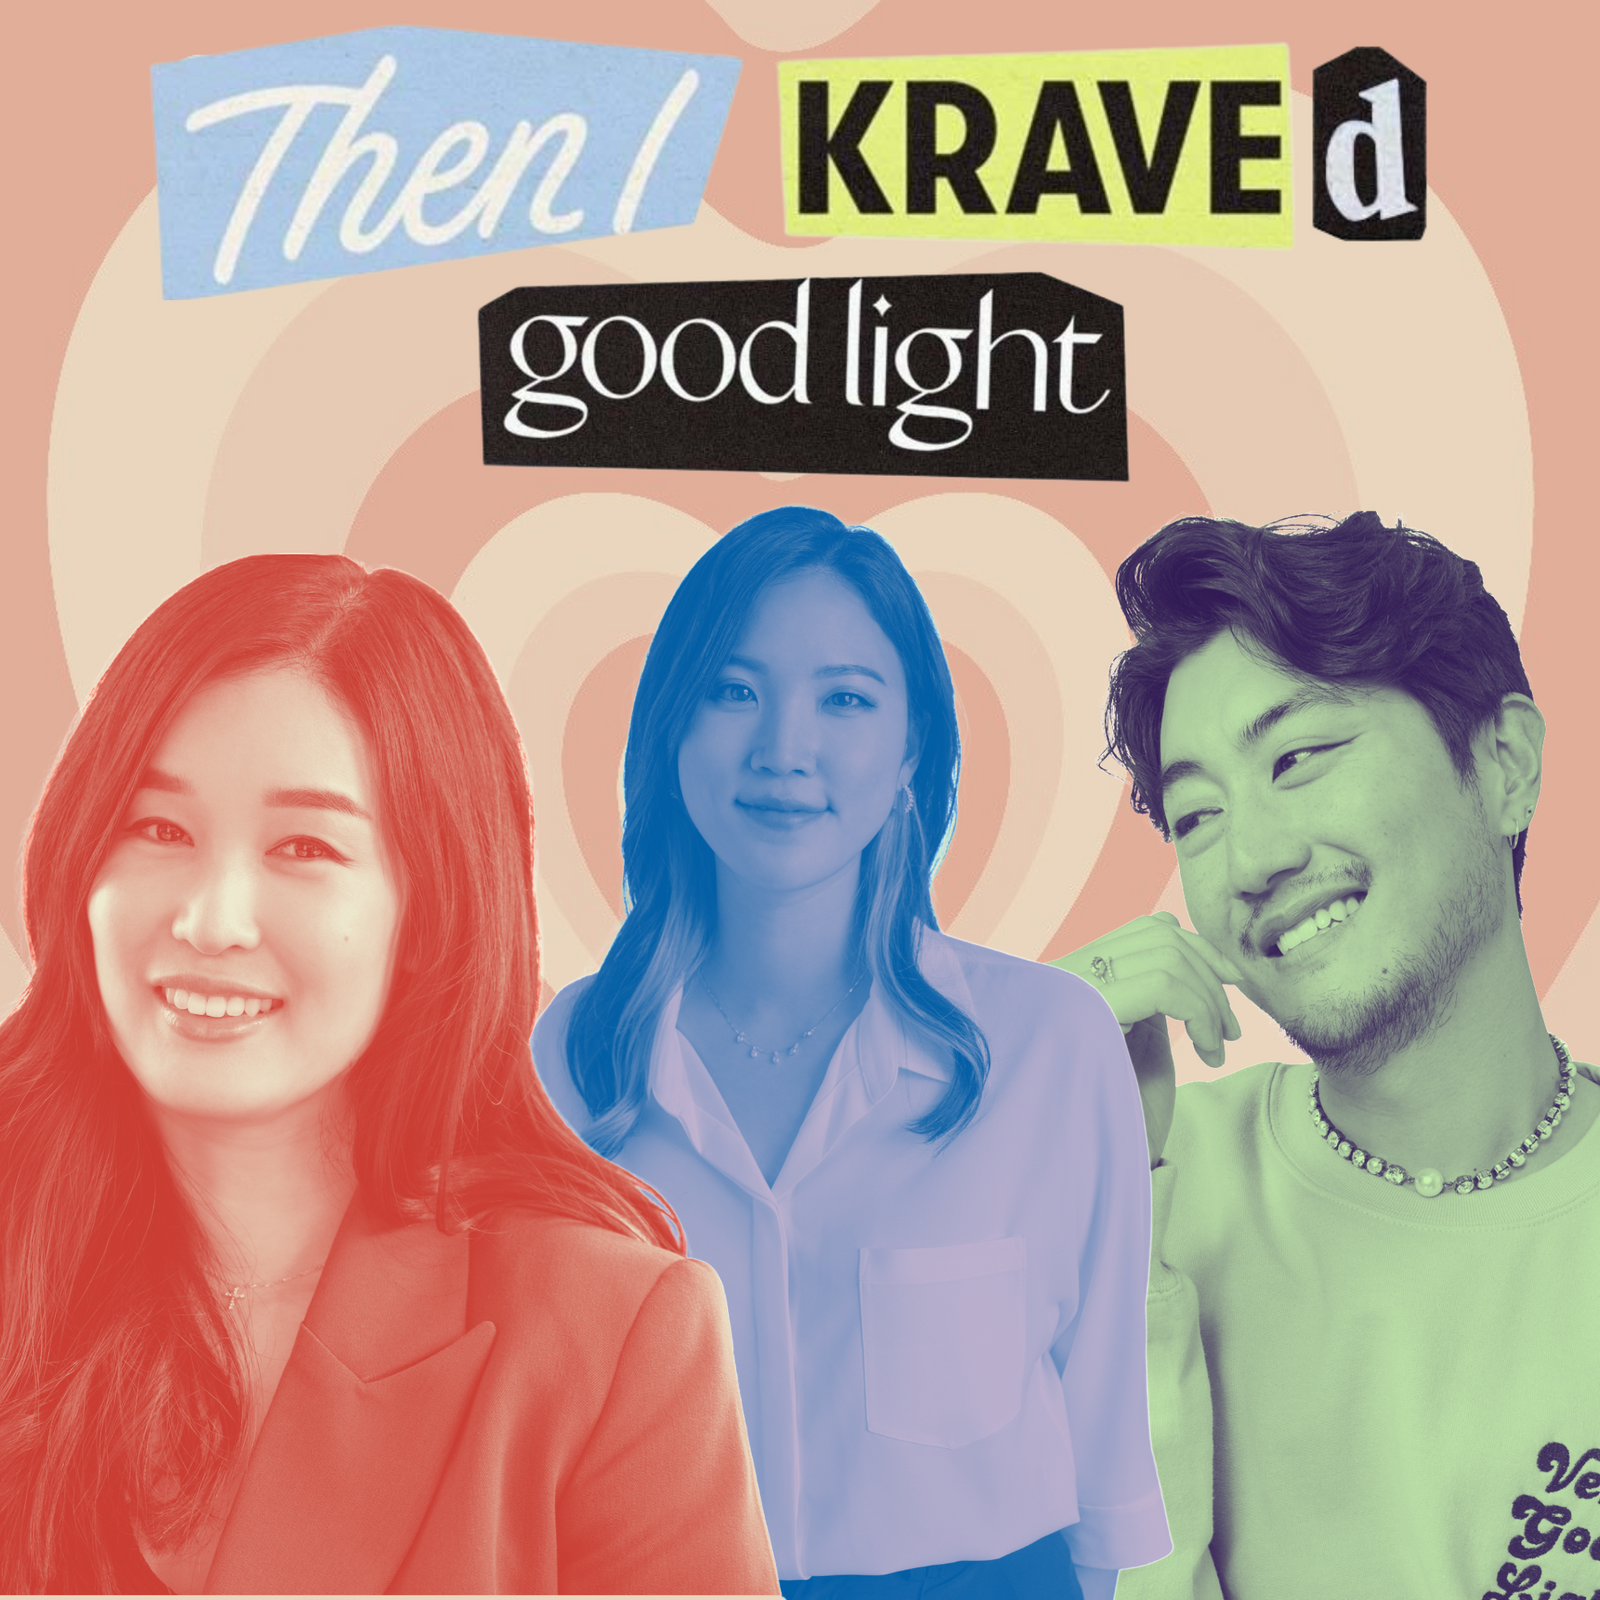 The Asian Skincare Cinematic Universe: Introducing Then I Krave’d good light